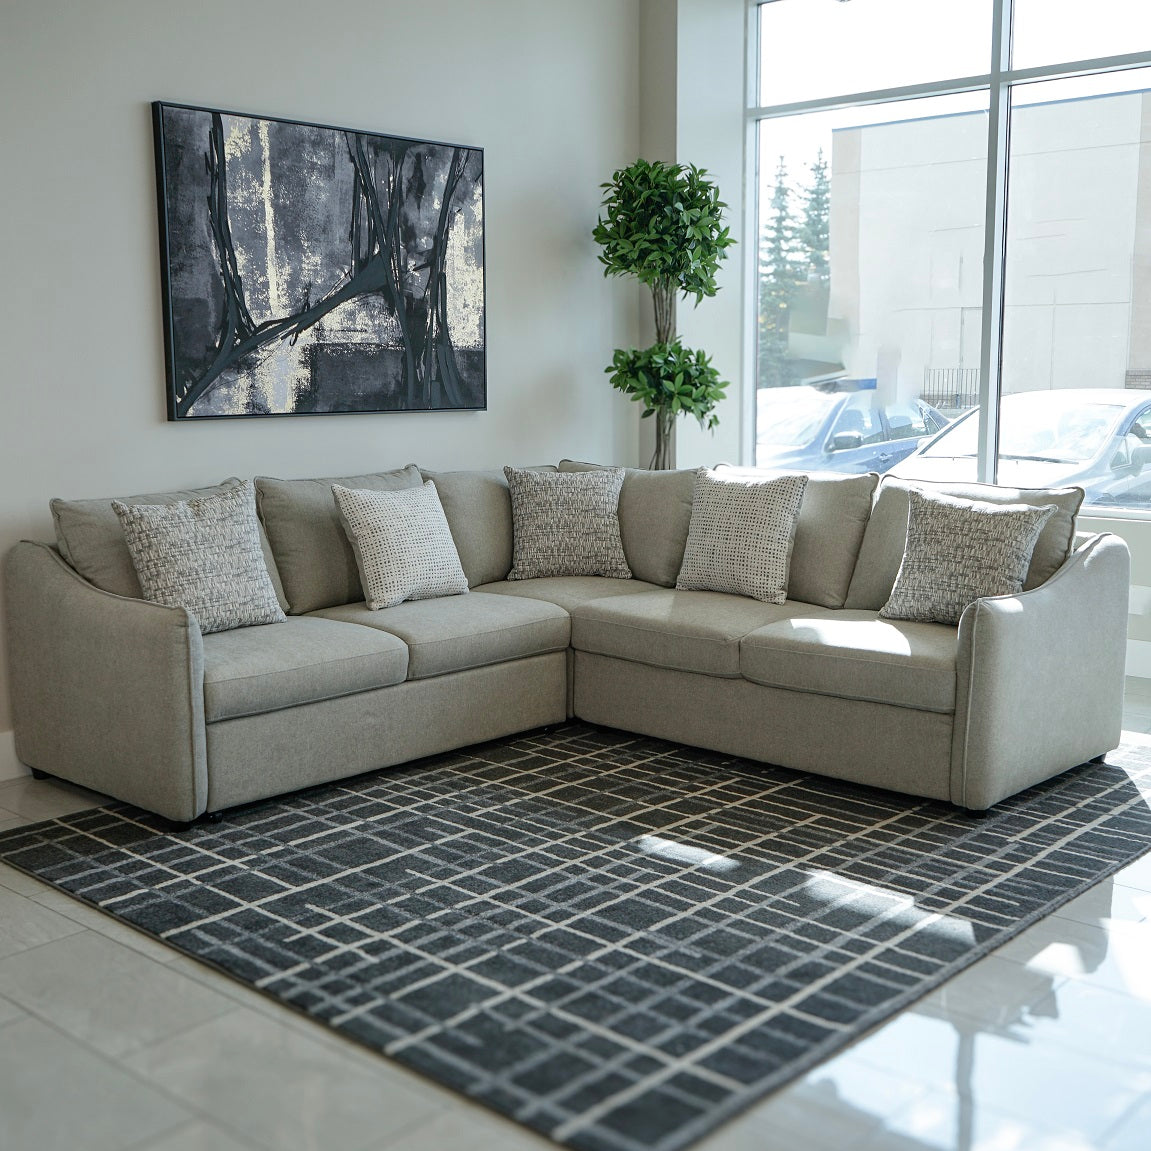 Living Room Furniture in Calgary at Fair Prices